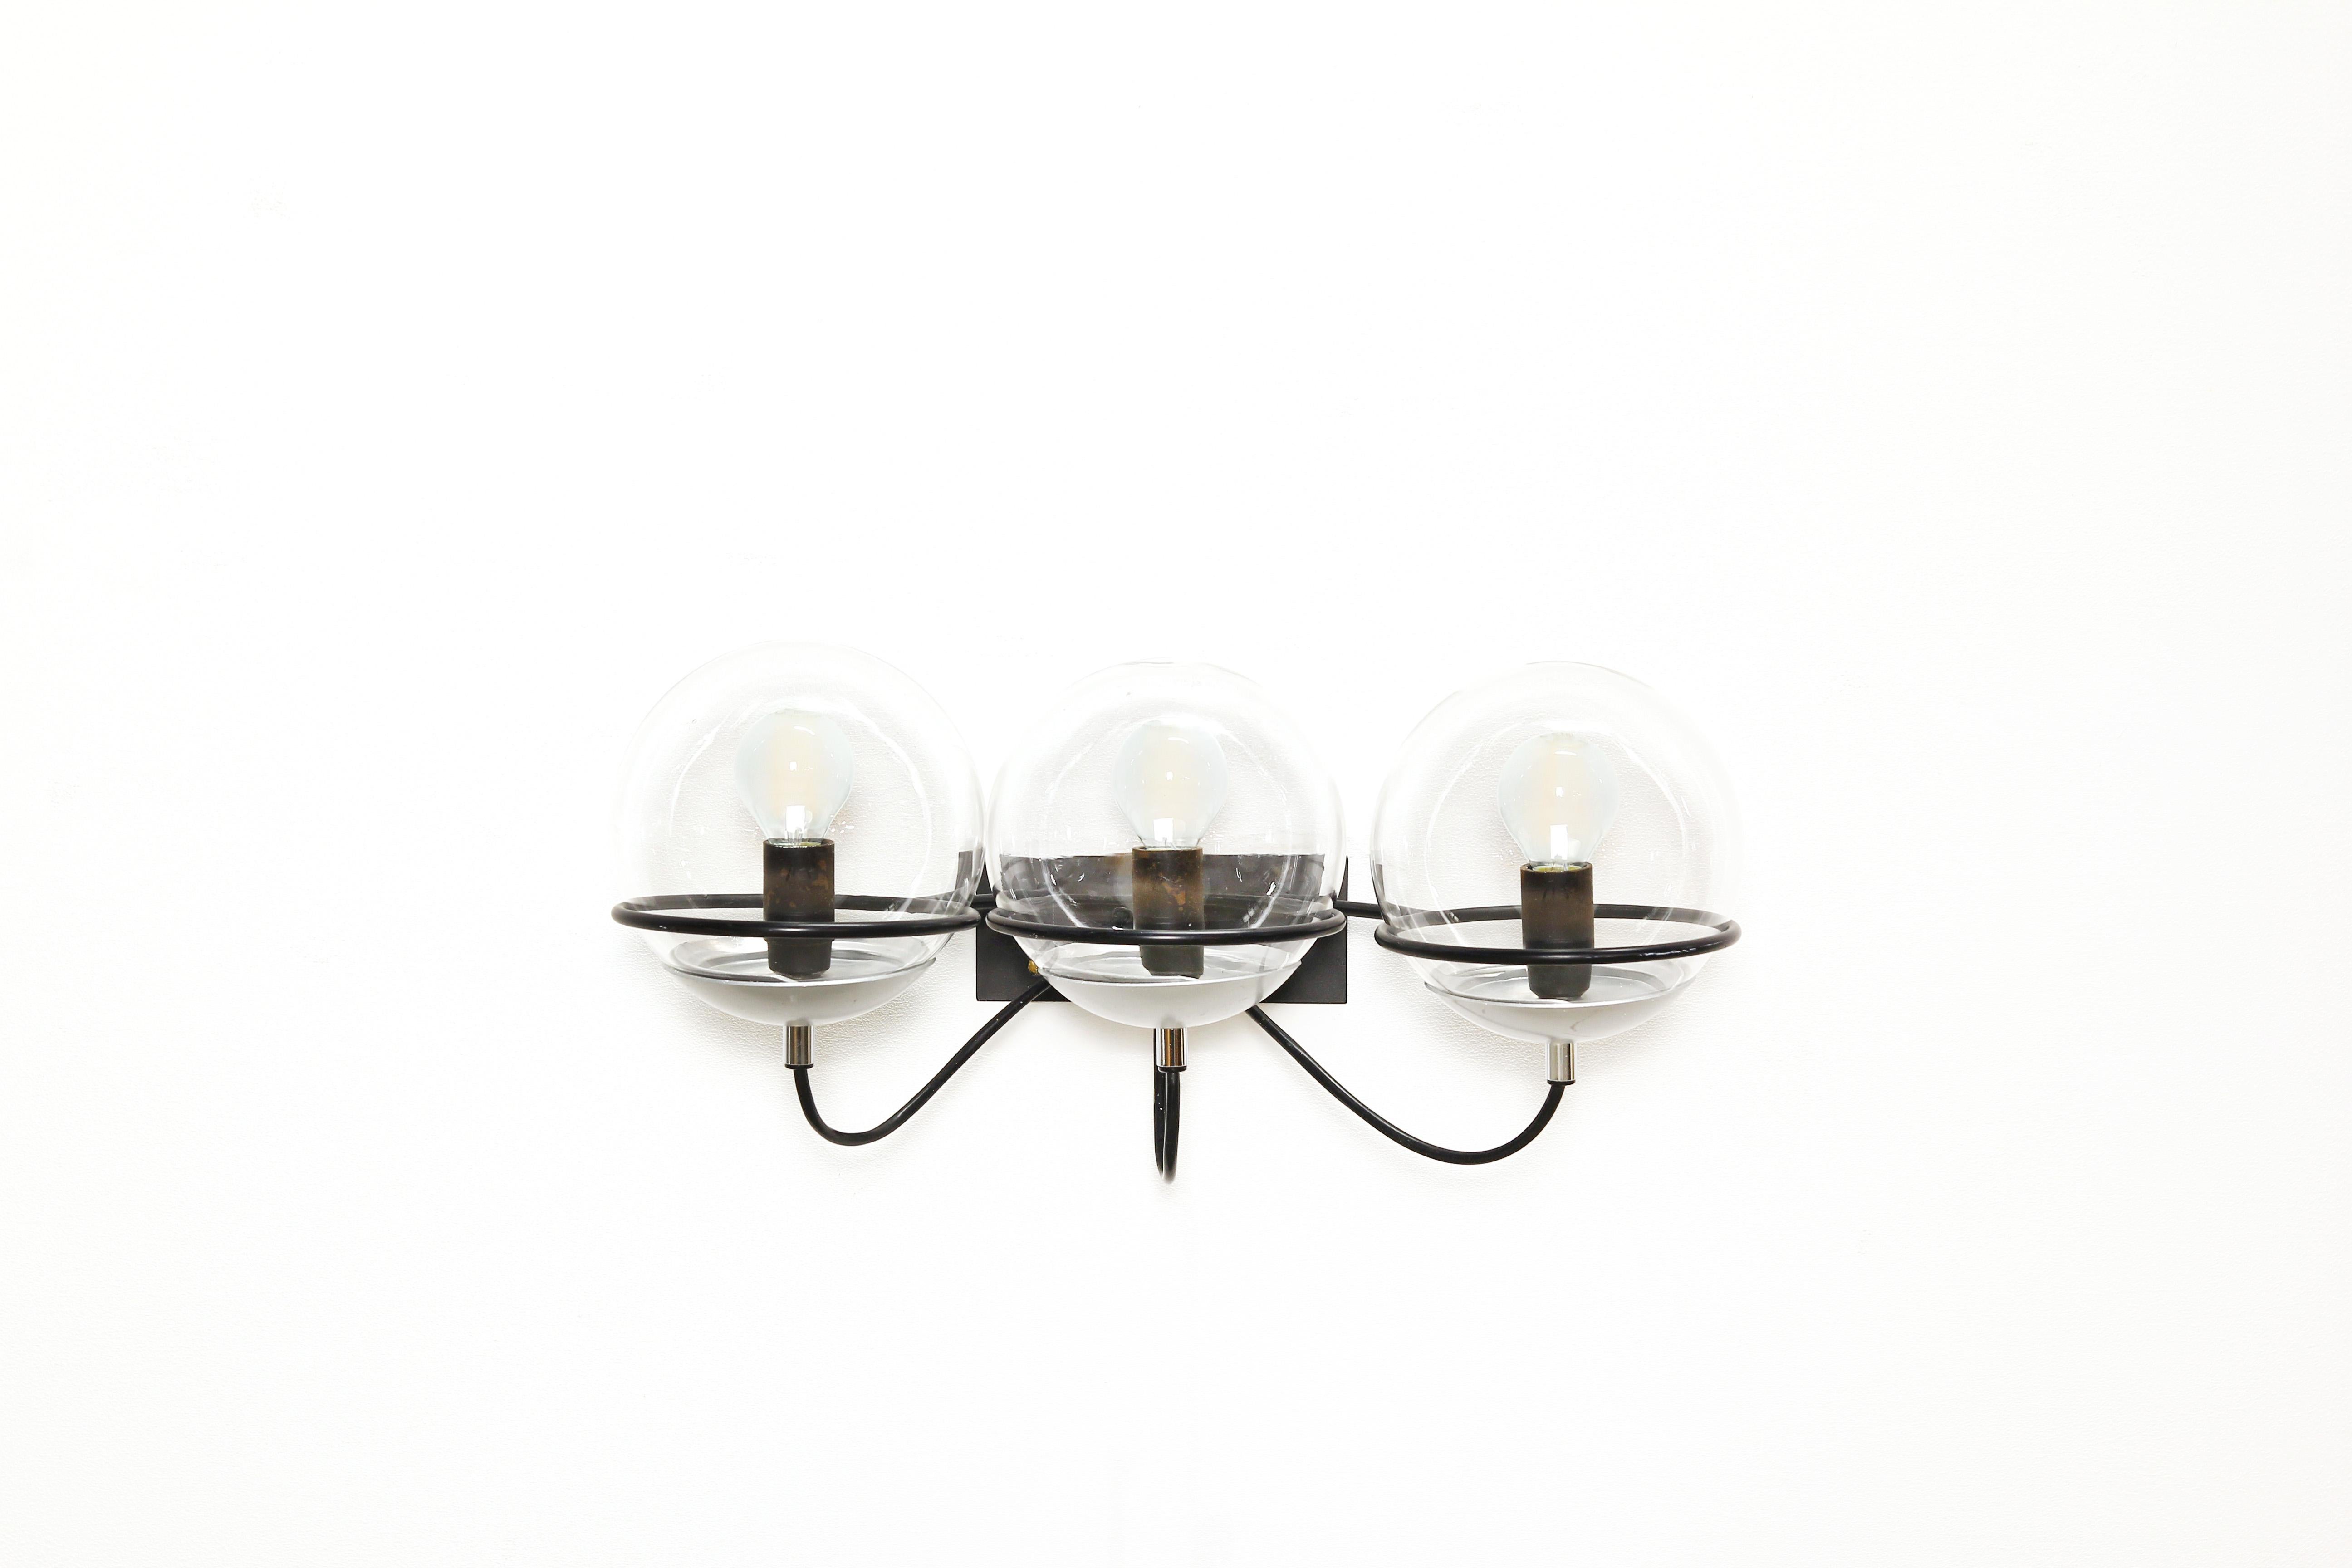 Very beautiful wall lamp with 3 glass balls designed by Gino Sarfatti and produced by Arteluce in the 1960s.
In original and very good condition. Two wall lamps are available. The price is for one.